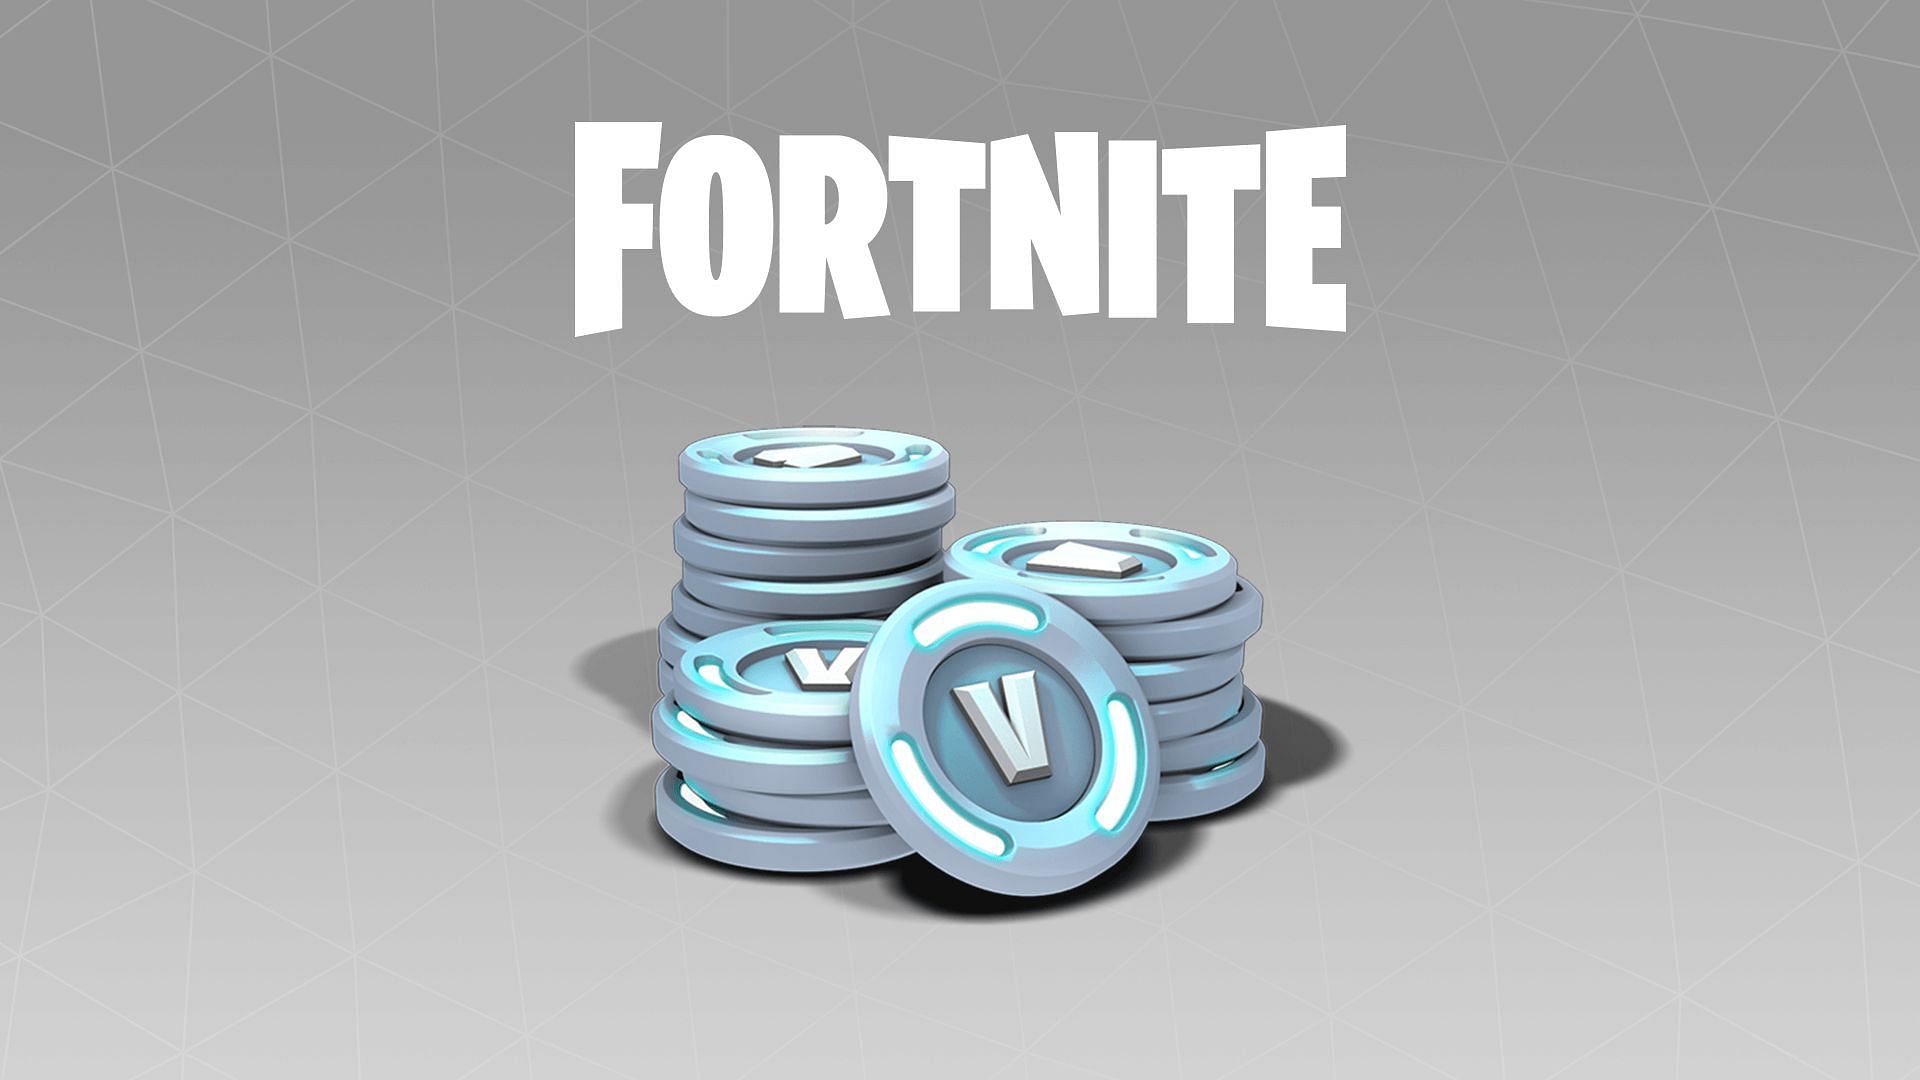 There is a chance that Epic Games will send V-Bucks to players (Image via Epic Games)